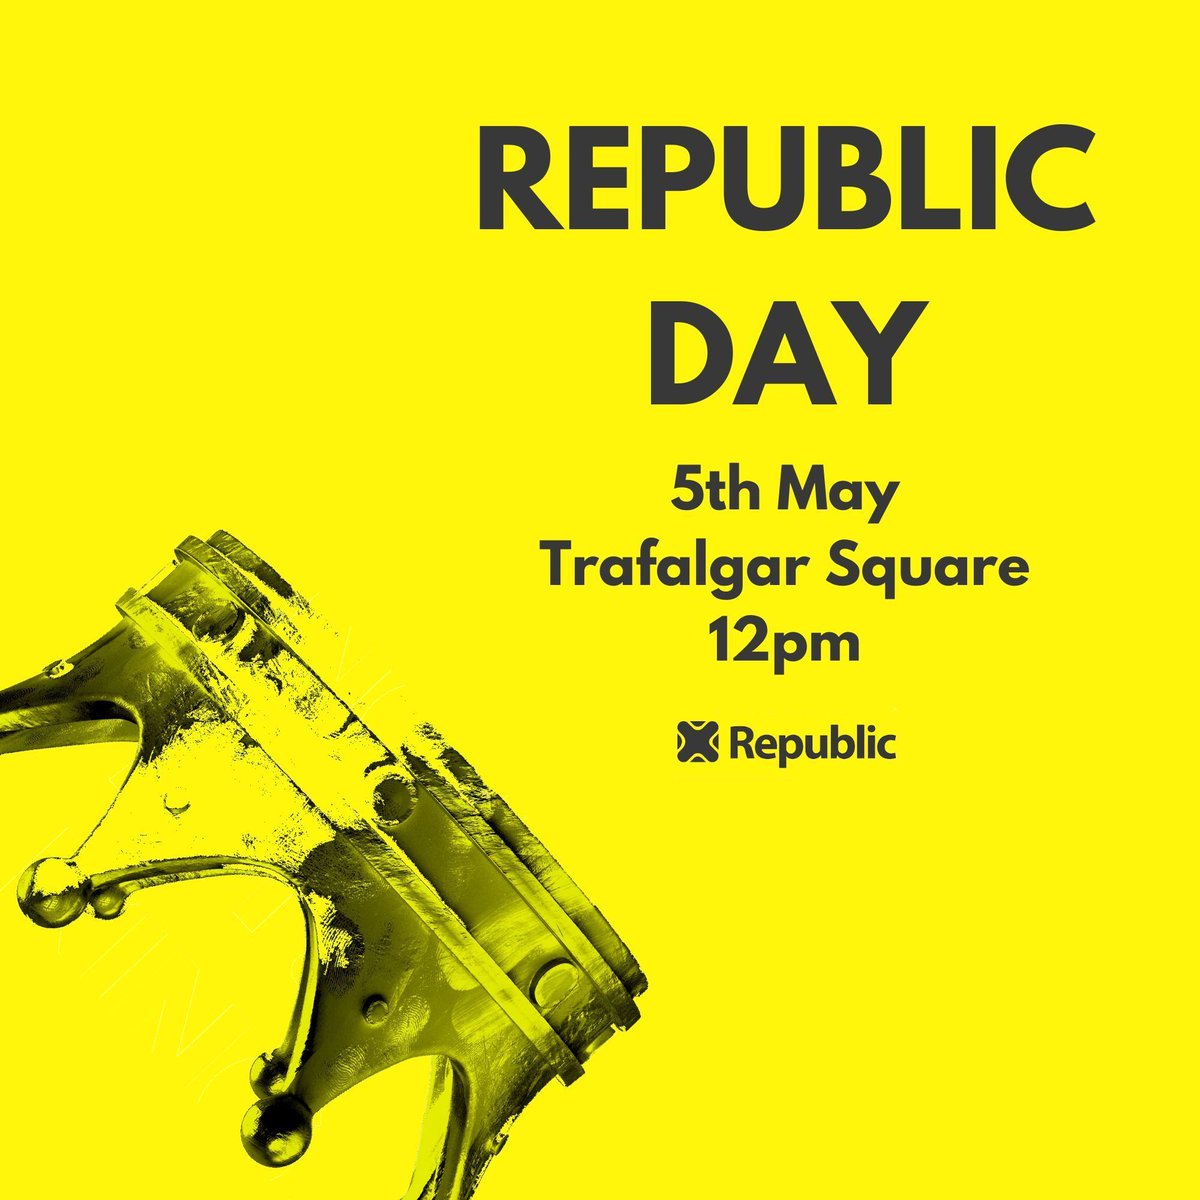 5th May. Trafalgar Square. We rally for republicanism at #RepublicDay. It's time to #AbolishTheMonarchy. #NotMyKing